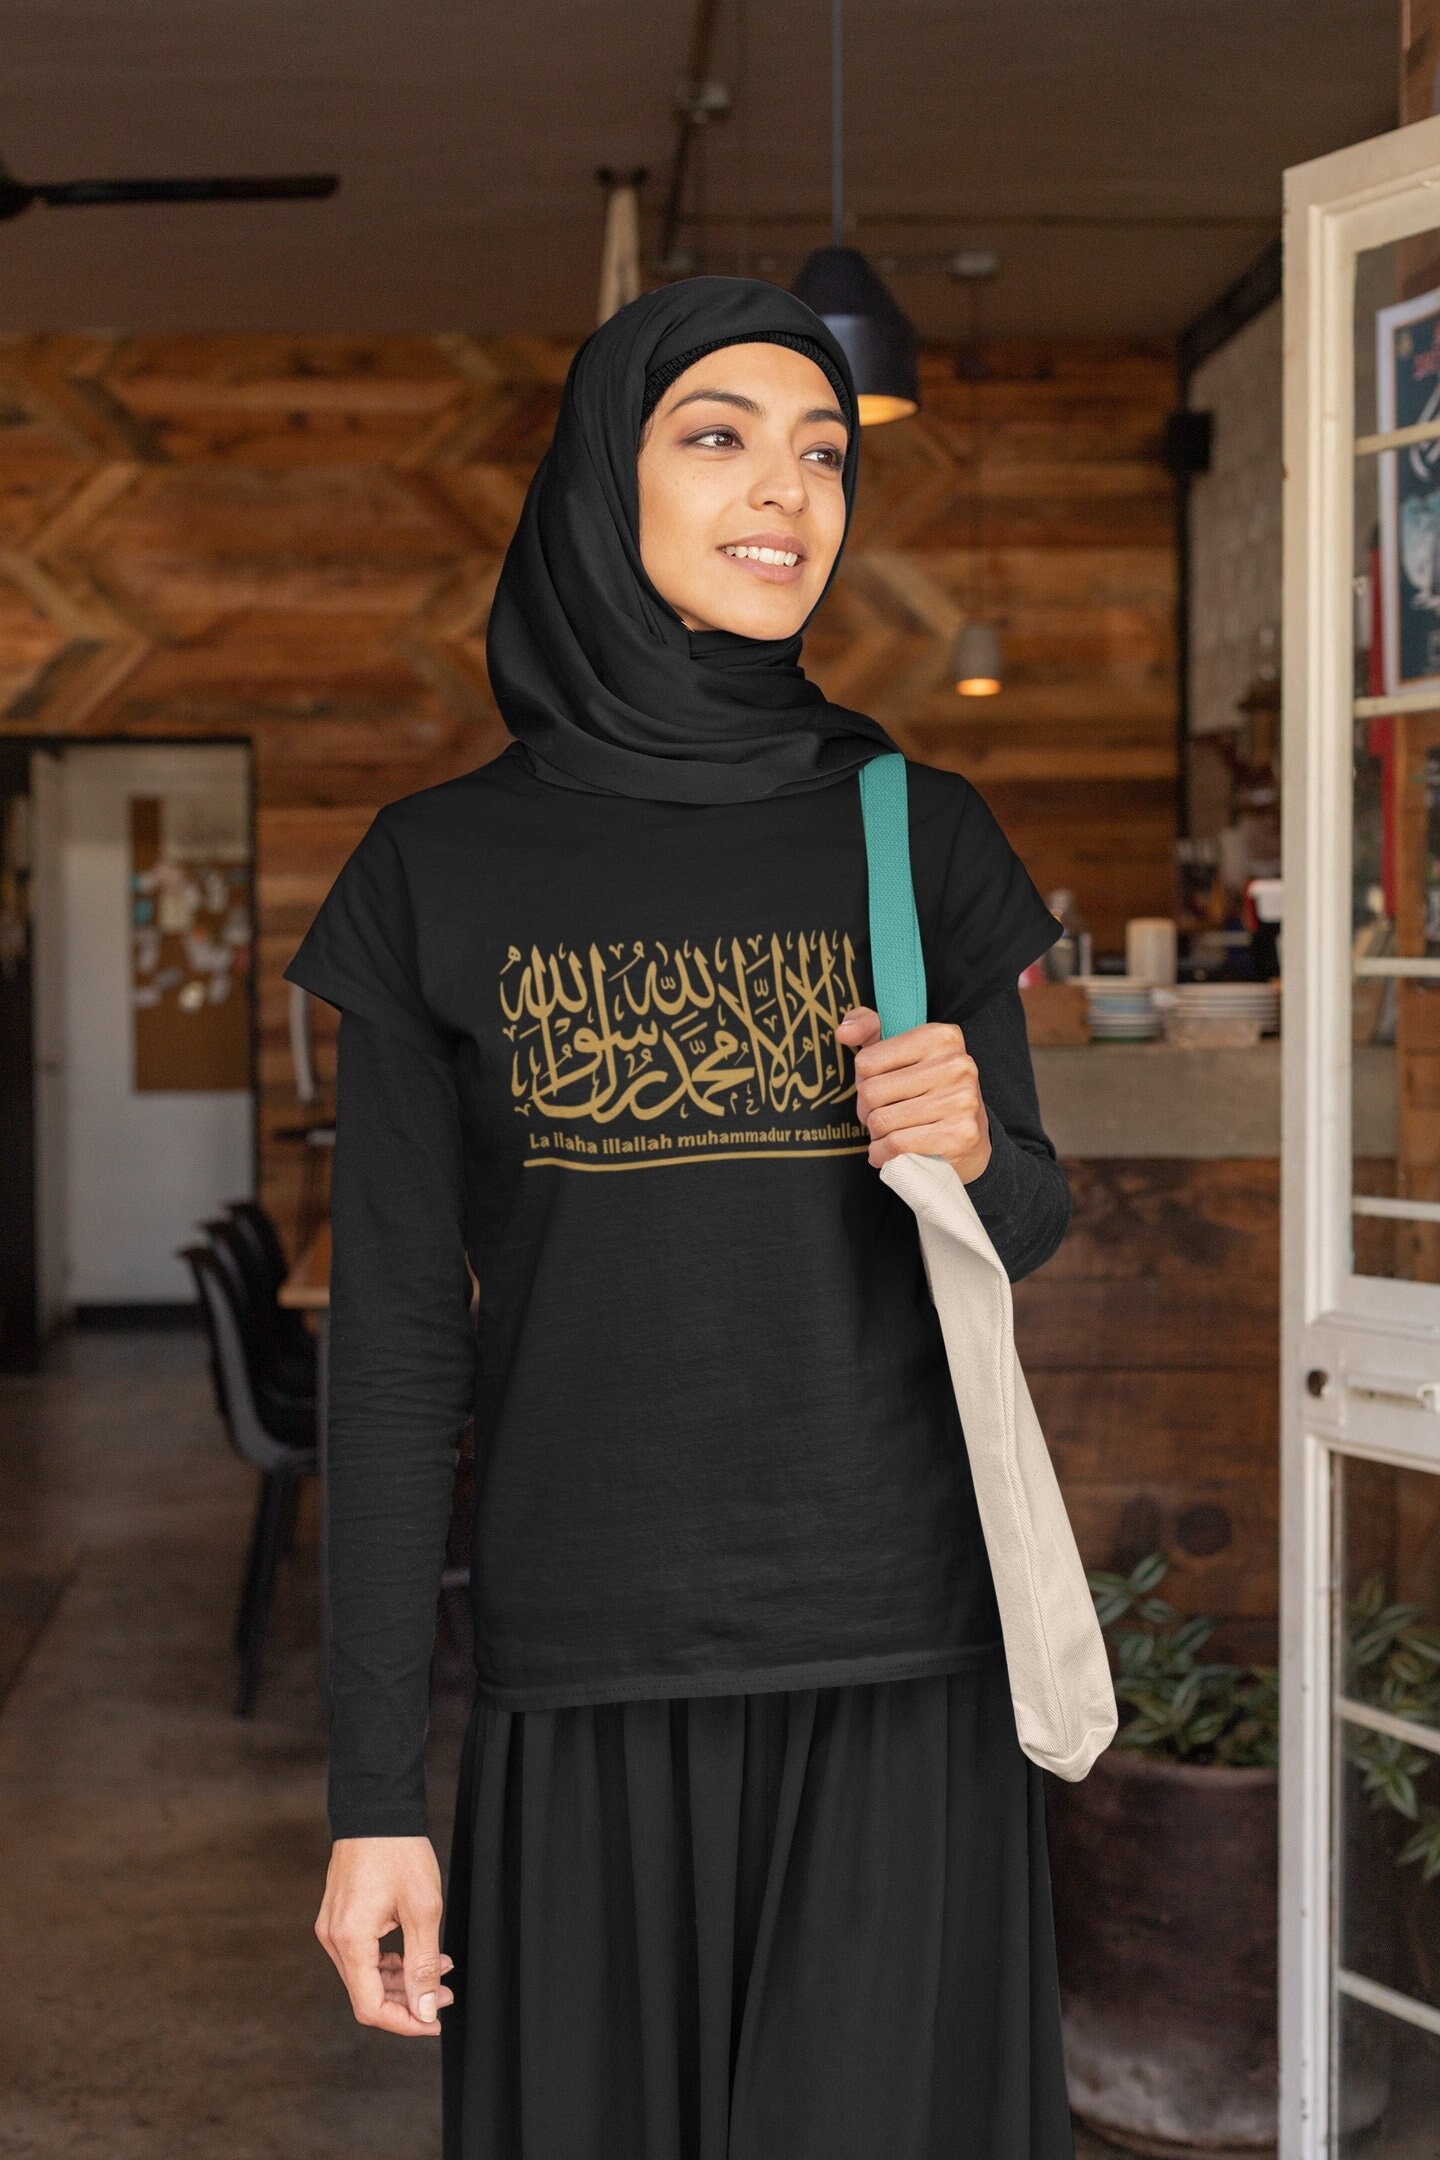 Muslim T-Shirts Clothing - Louisville-Jefferson, Kentucky logo design for  men and women, Islamic Clothing and Books